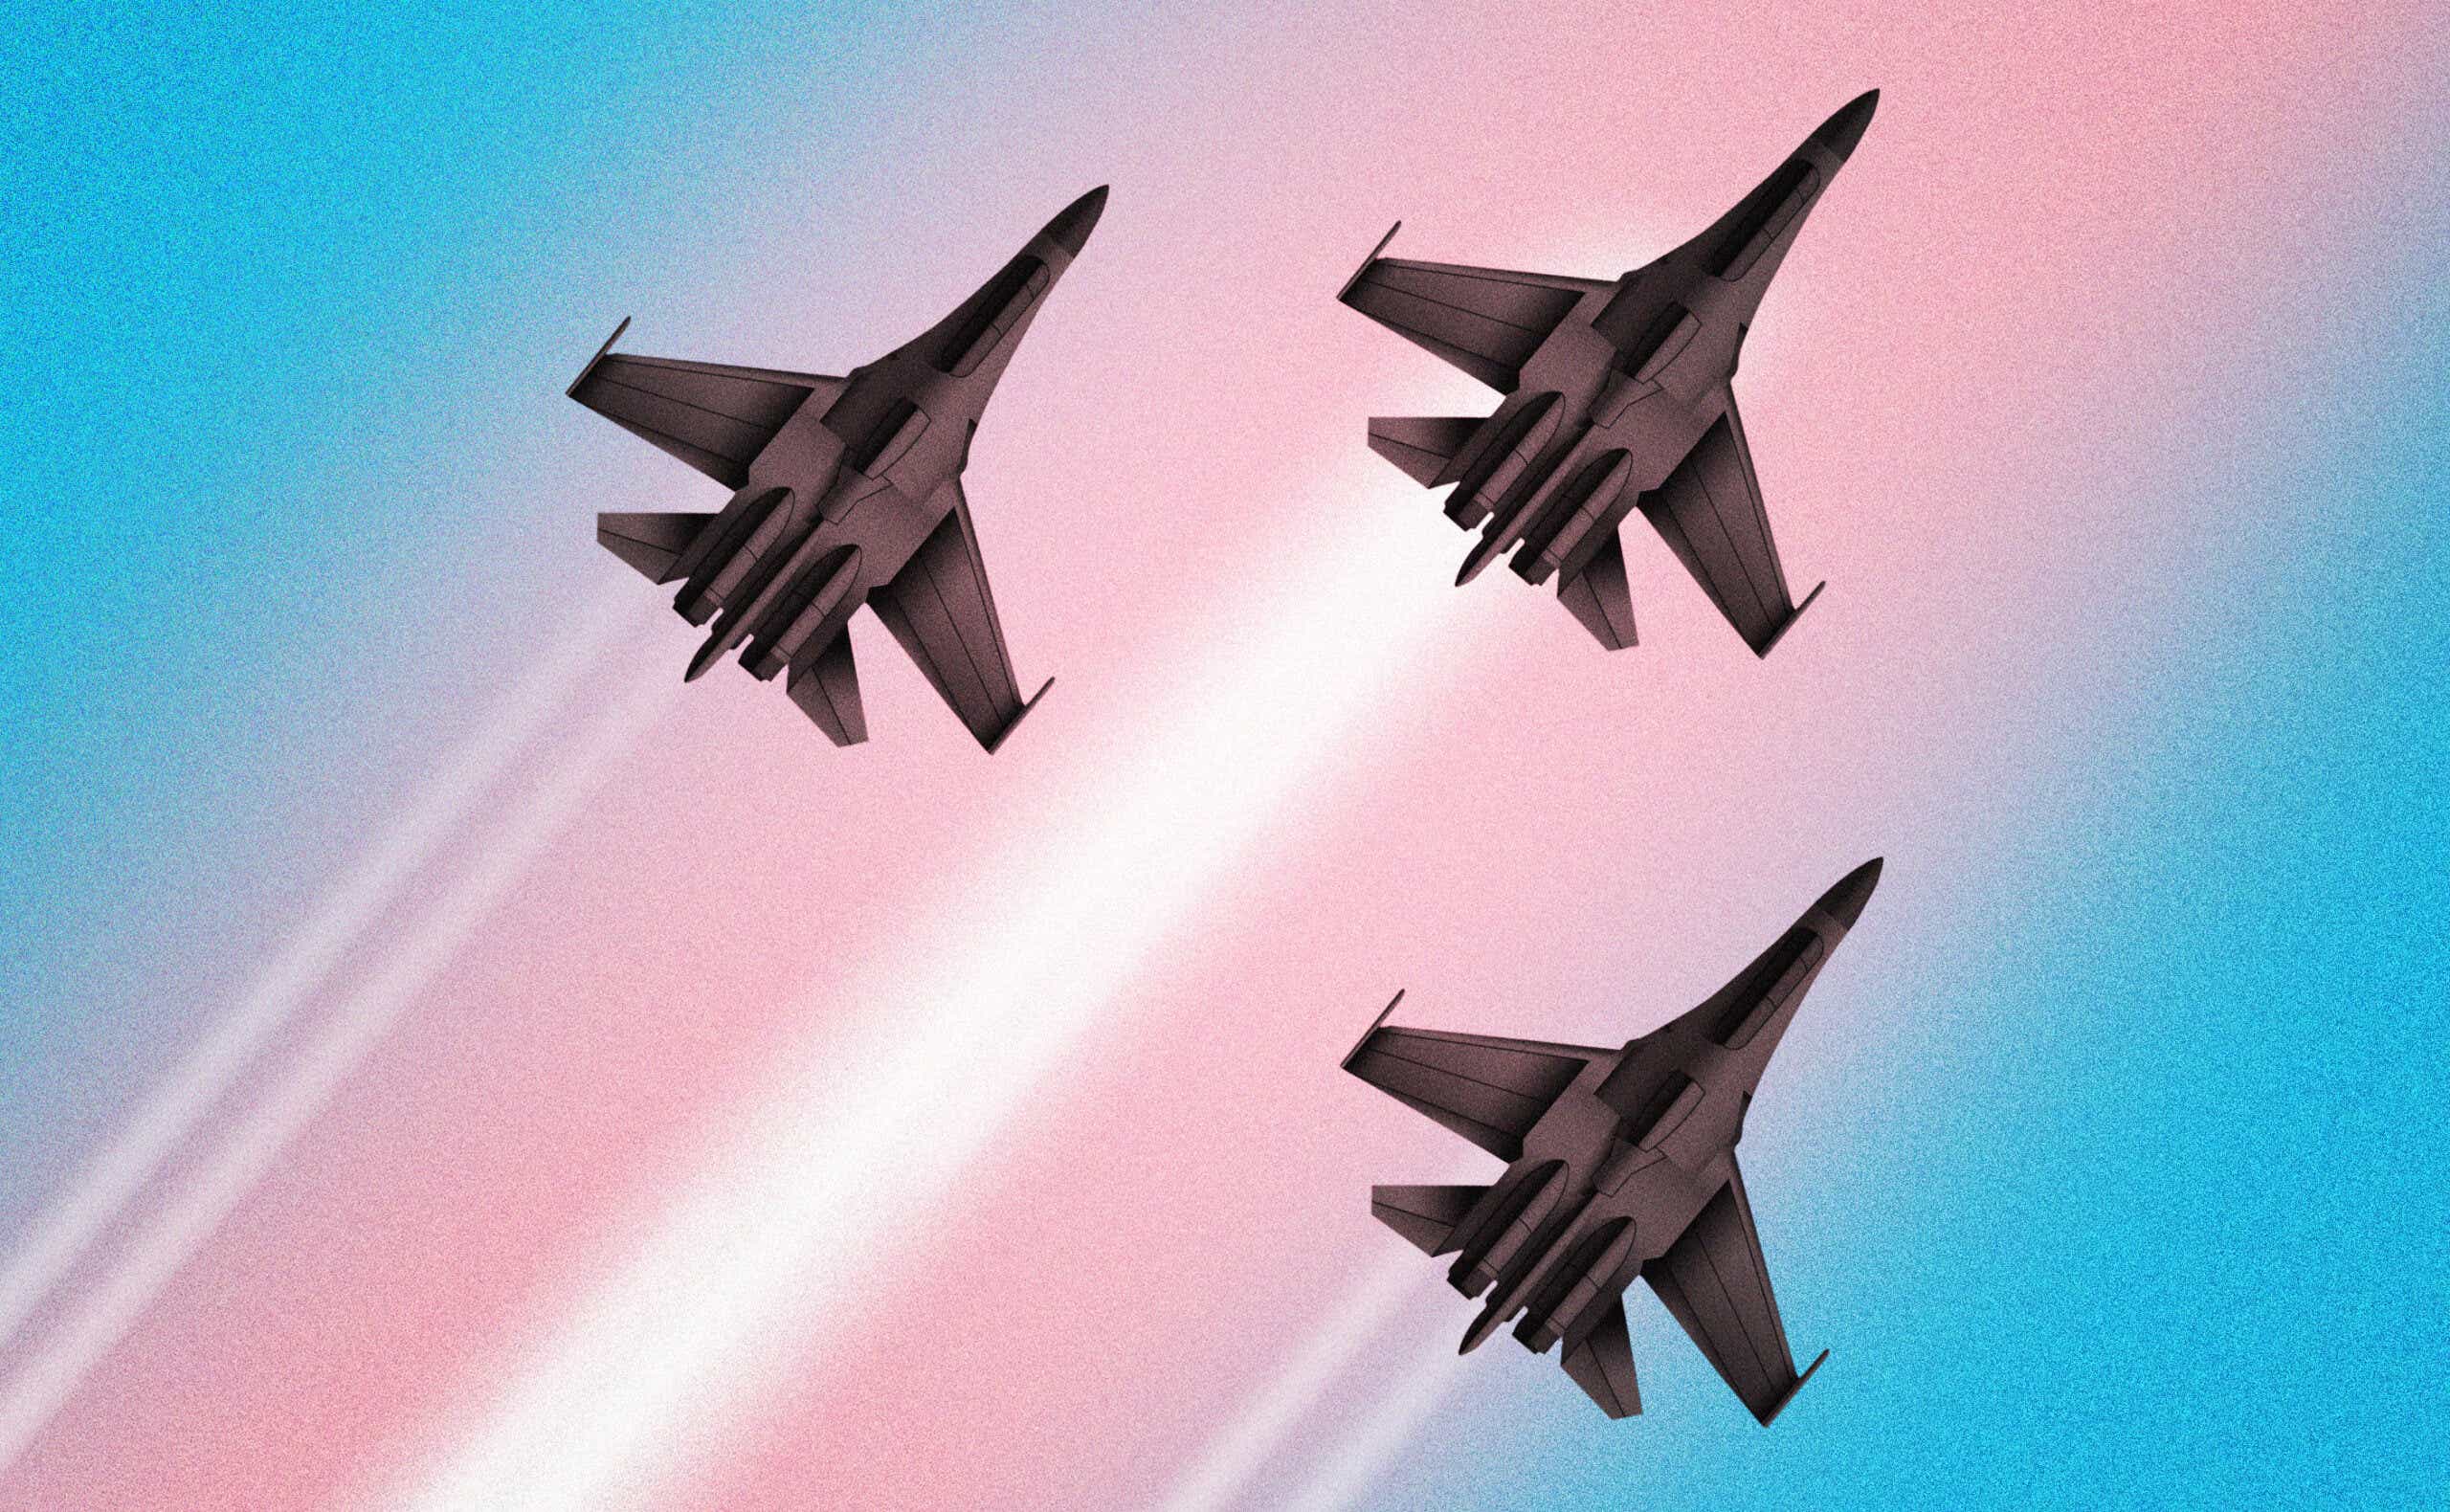 Illustration of Air Force jets flying over the colors of the transgender flag